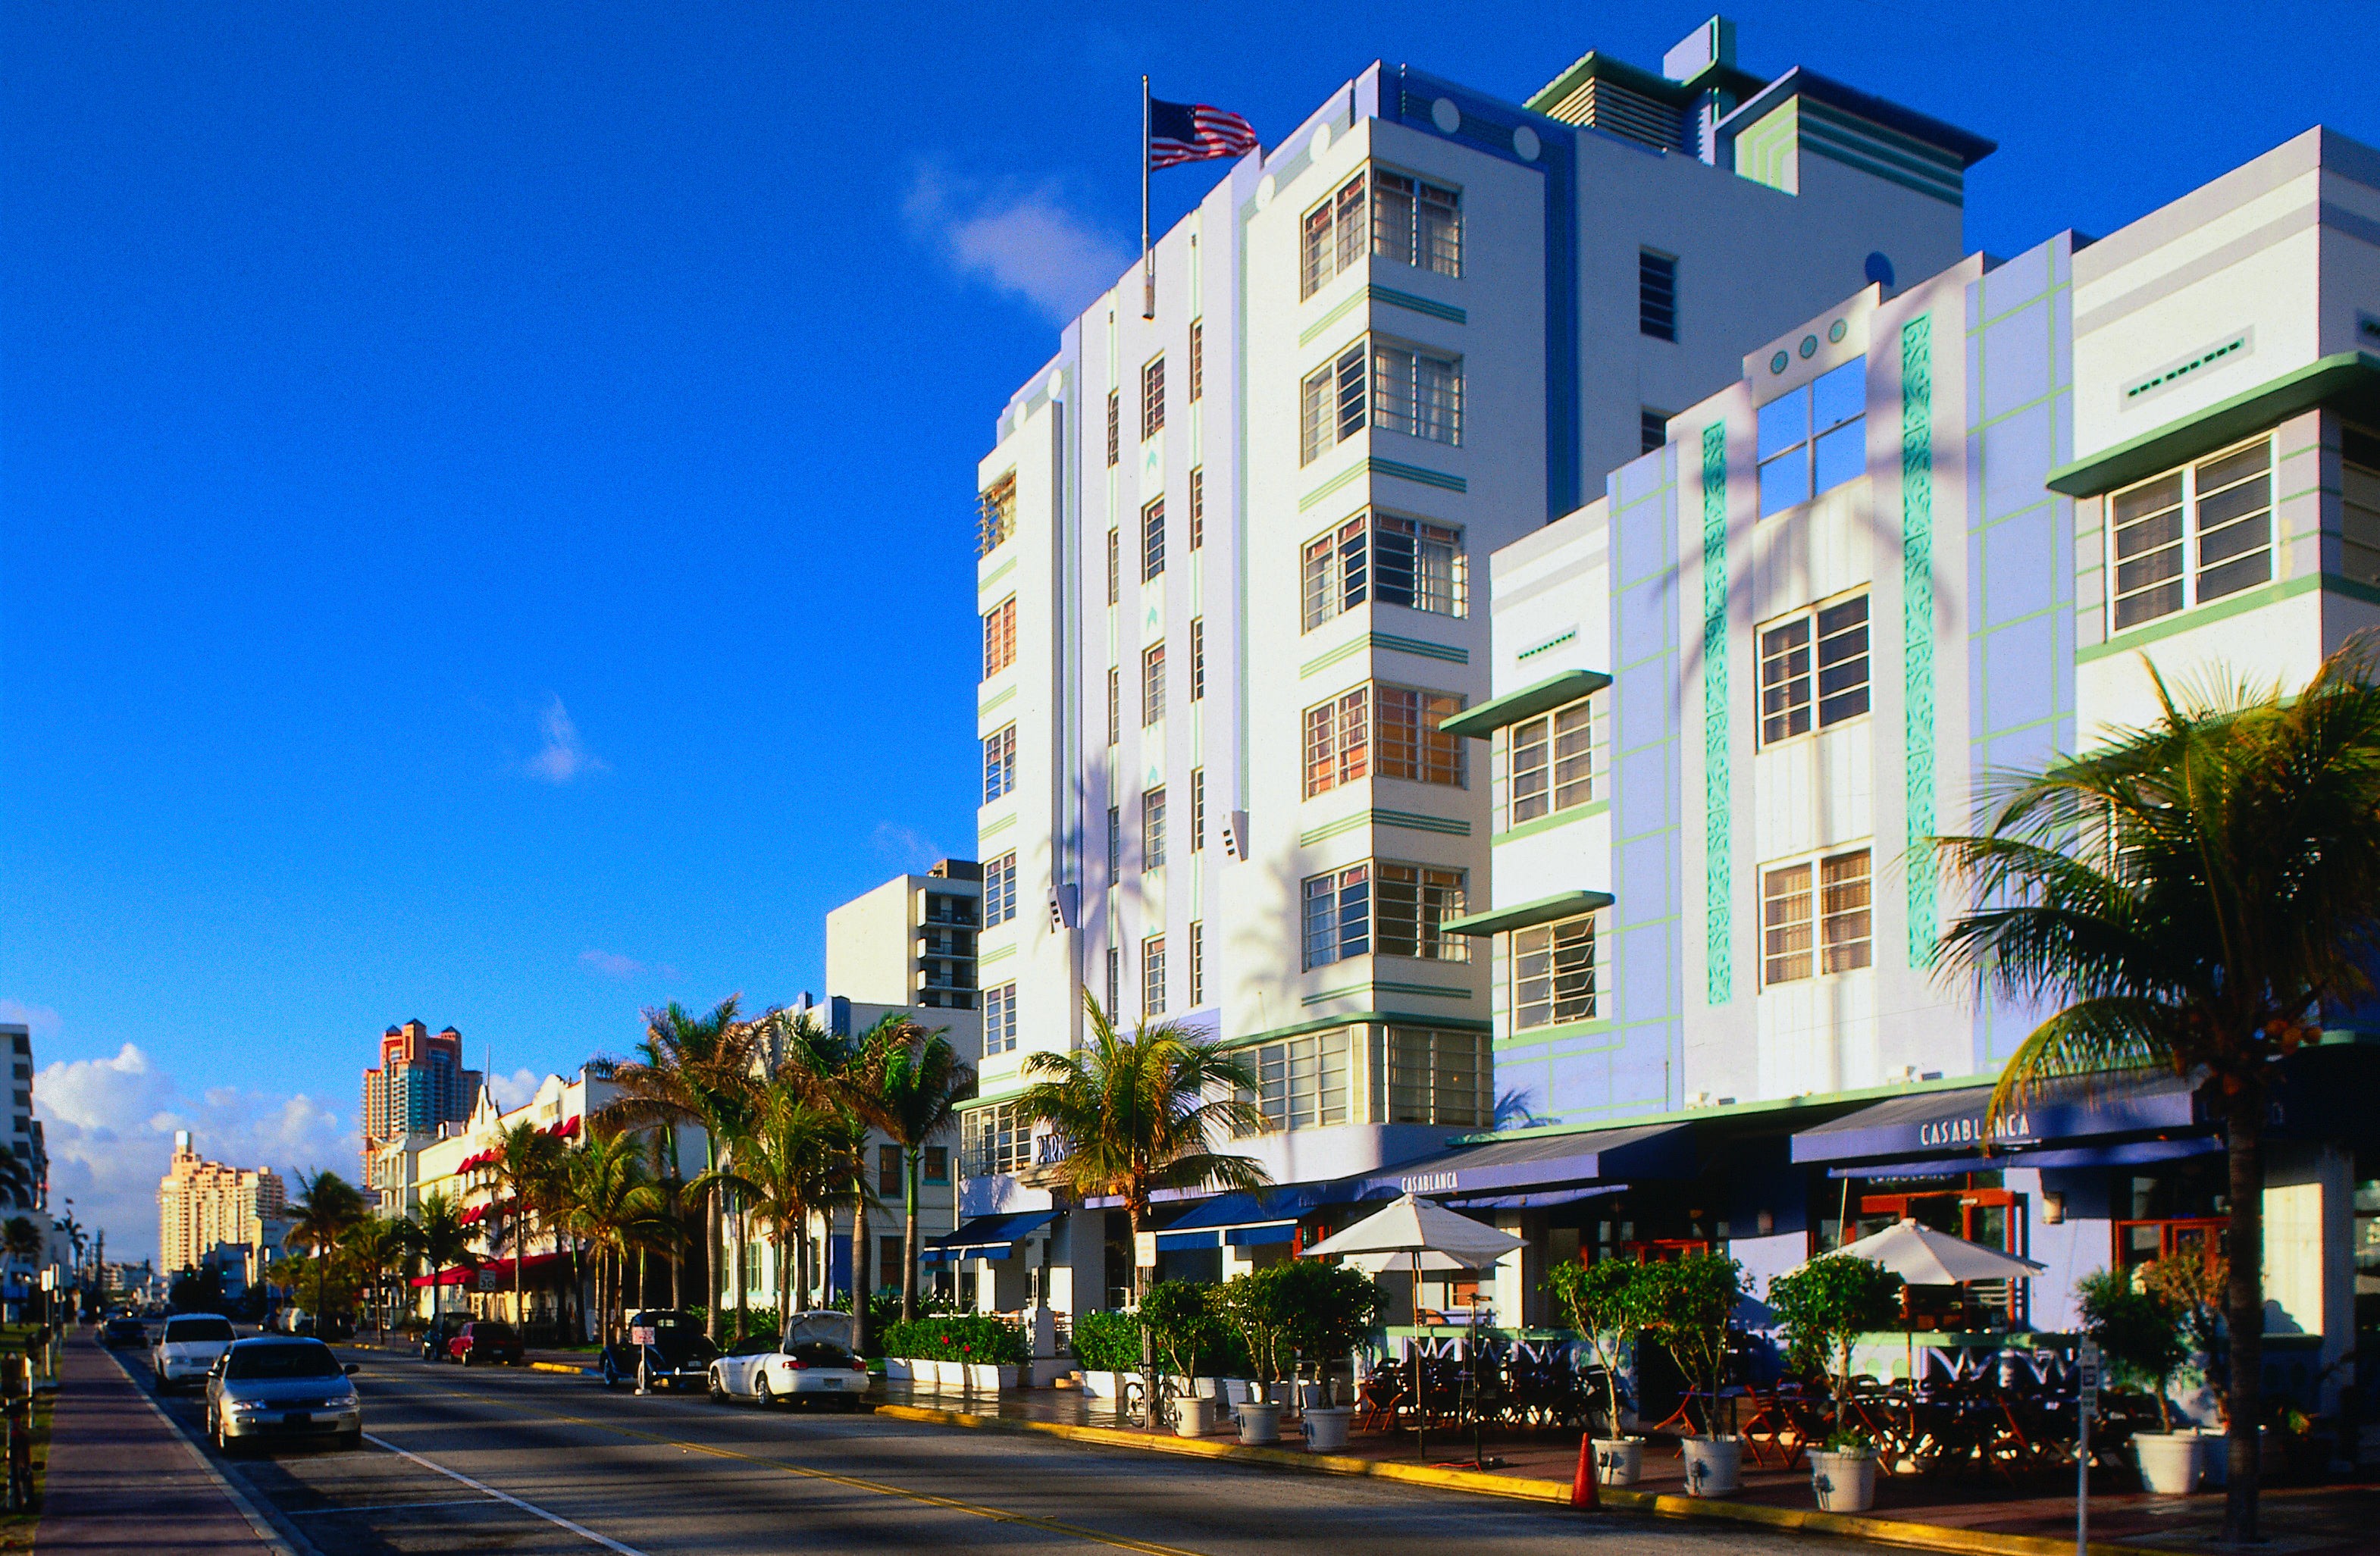 South Beach | Miami, USA Attractions - Lonely Planet